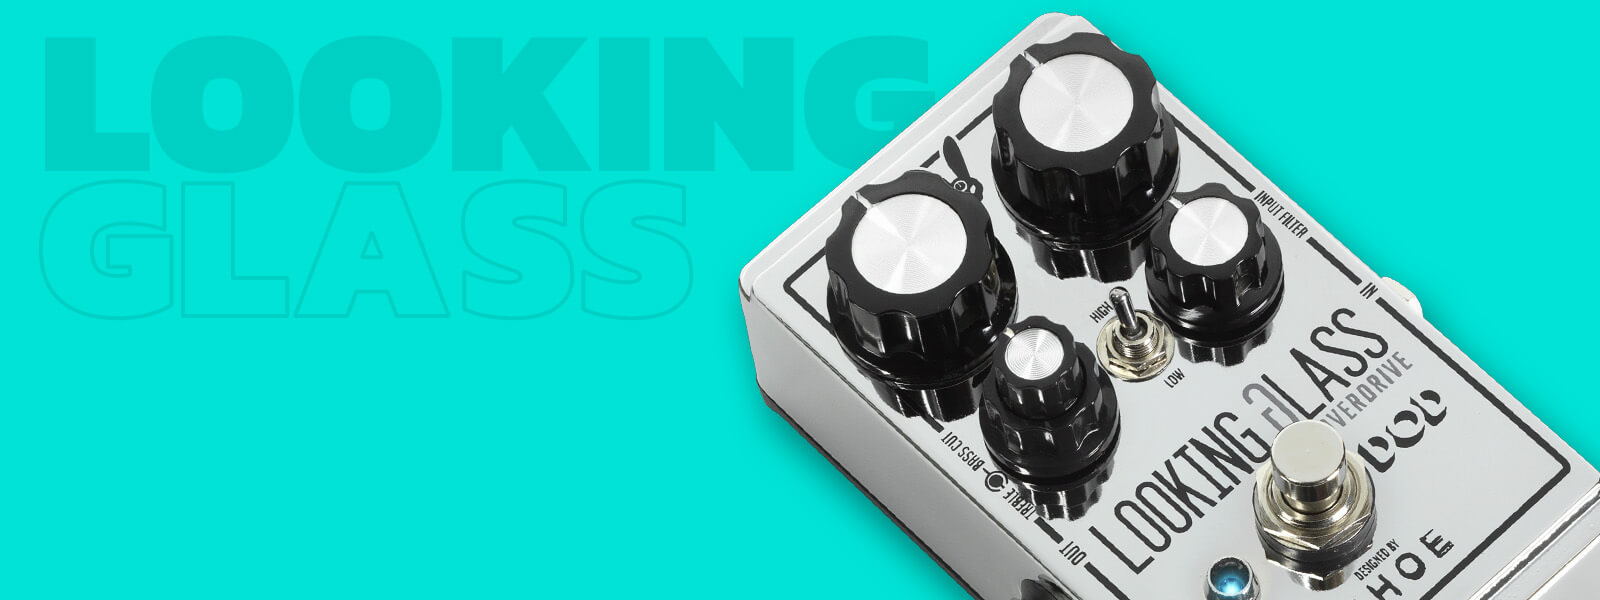 DOD Looking Glass class-a FET overdrive guitar pedal in silver with teal background and graphics in top left that says 